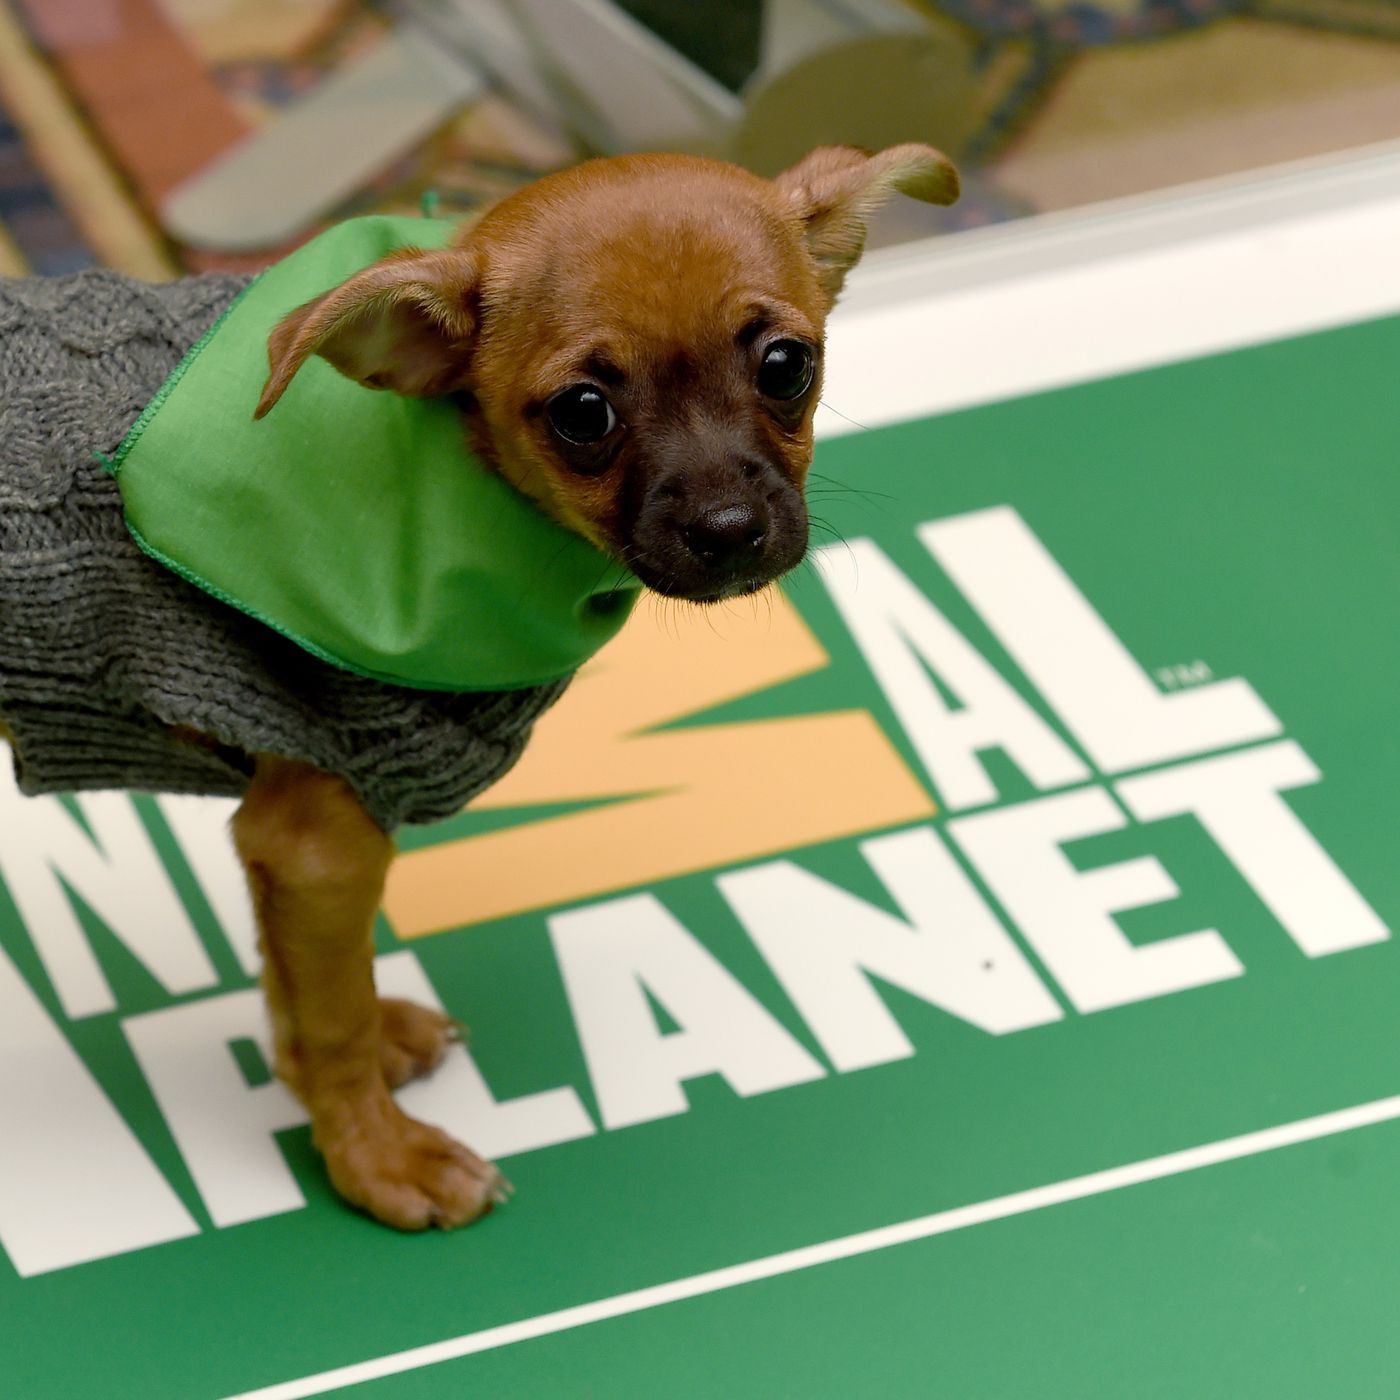 puppy bowl odds